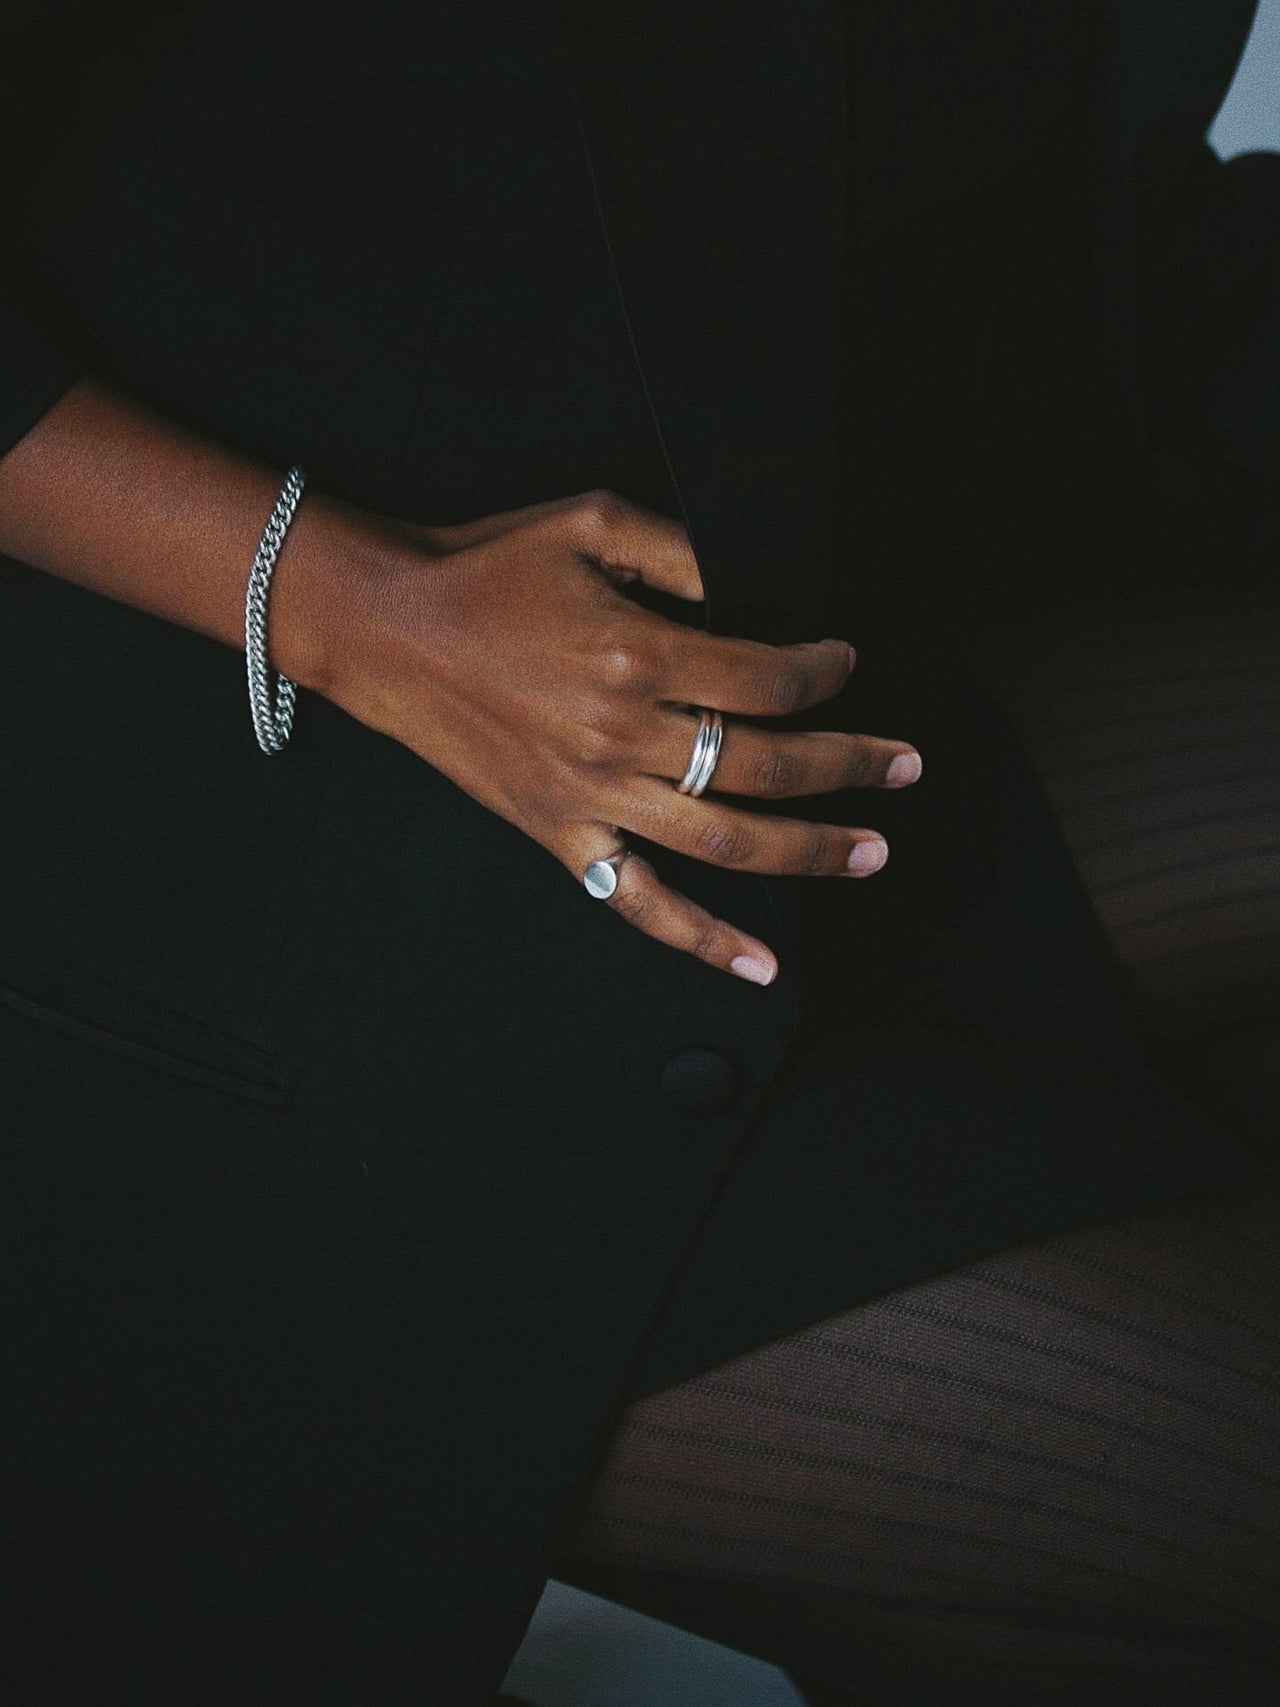 Petite Industrial Curb Chain Bracelet pictured in sterling silver on models wrist. Wearing all black for strong contrast. 